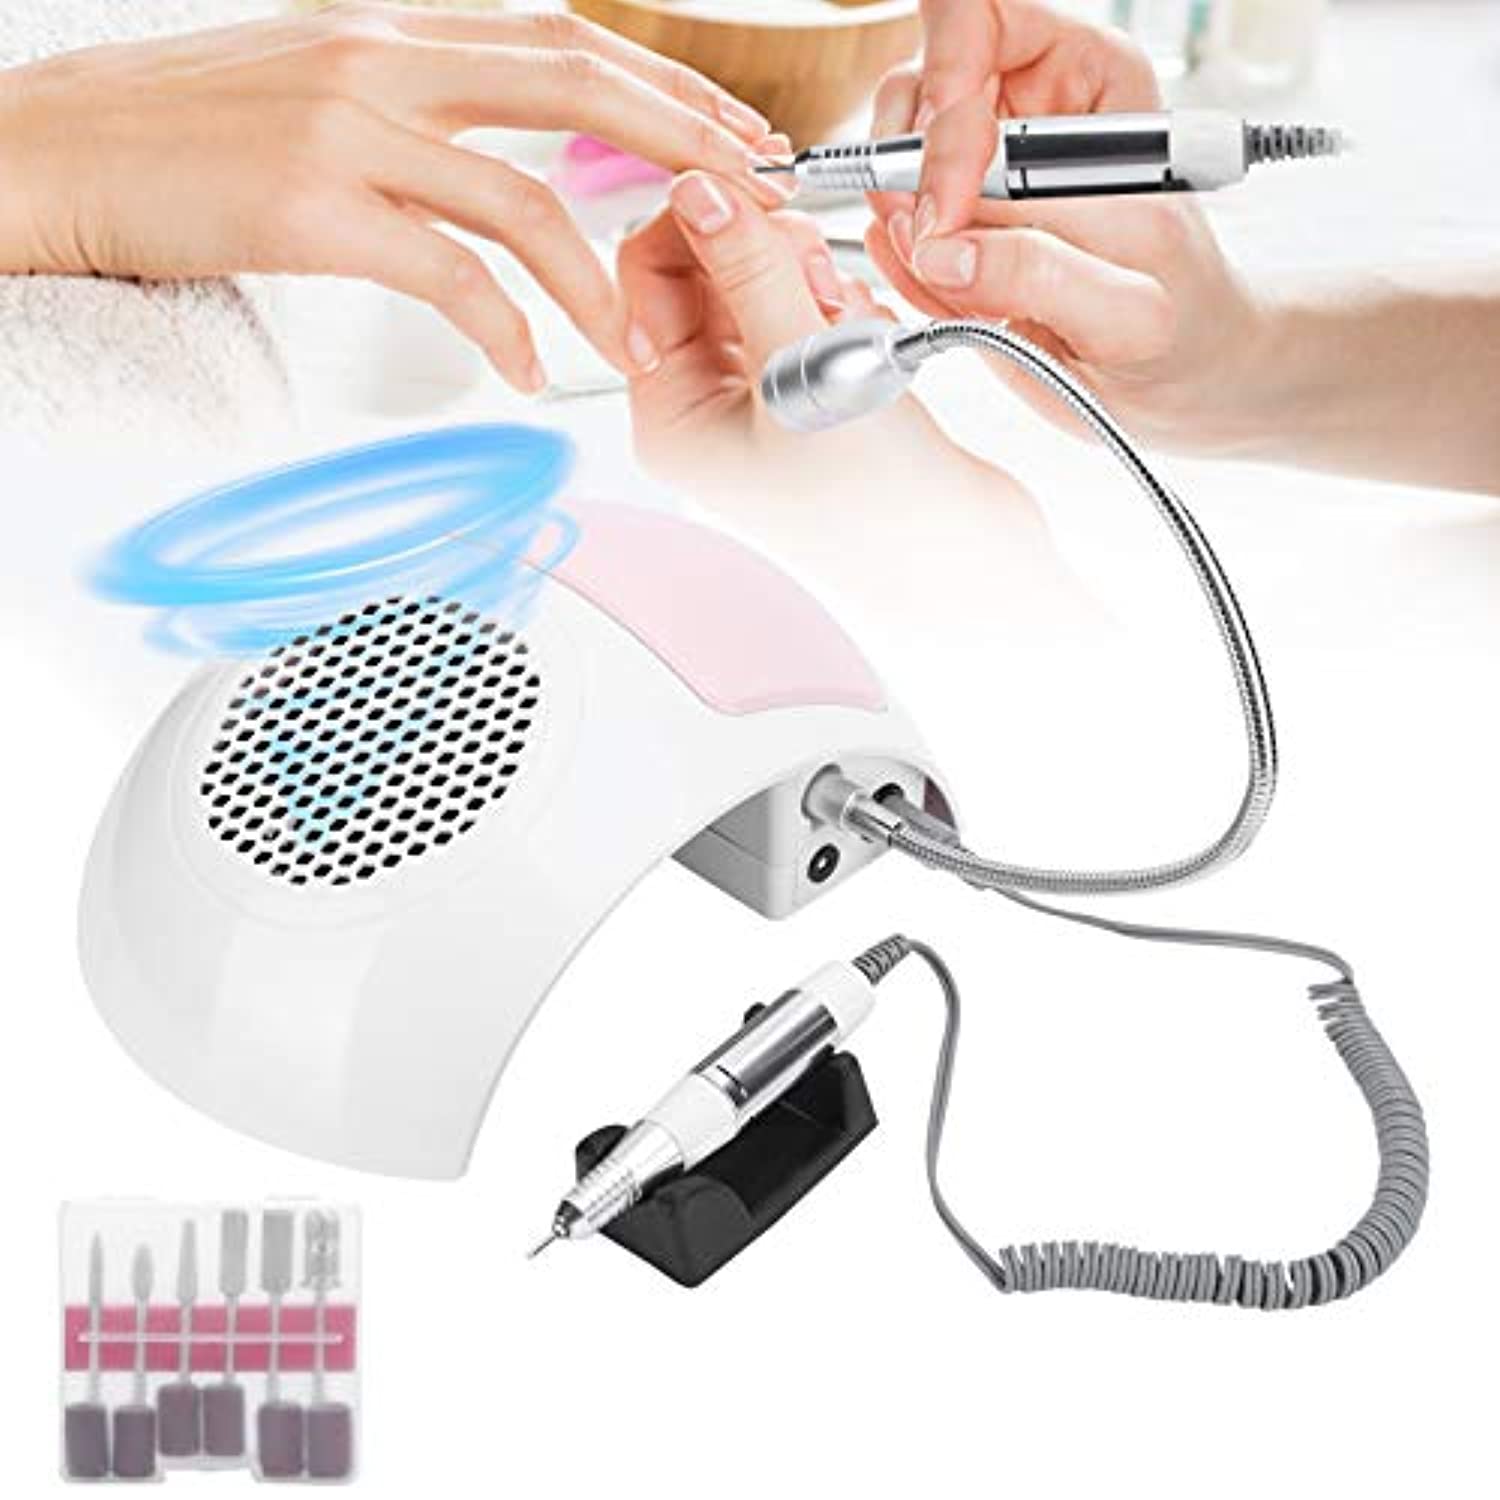 Nail Dust Collector, 80W 3 in 1 Nail Drill, Nail Polishing Machine Manicure Tool 25,000 Rpm LED Lamp for Nail Salon Home Use(U.S. regulations)